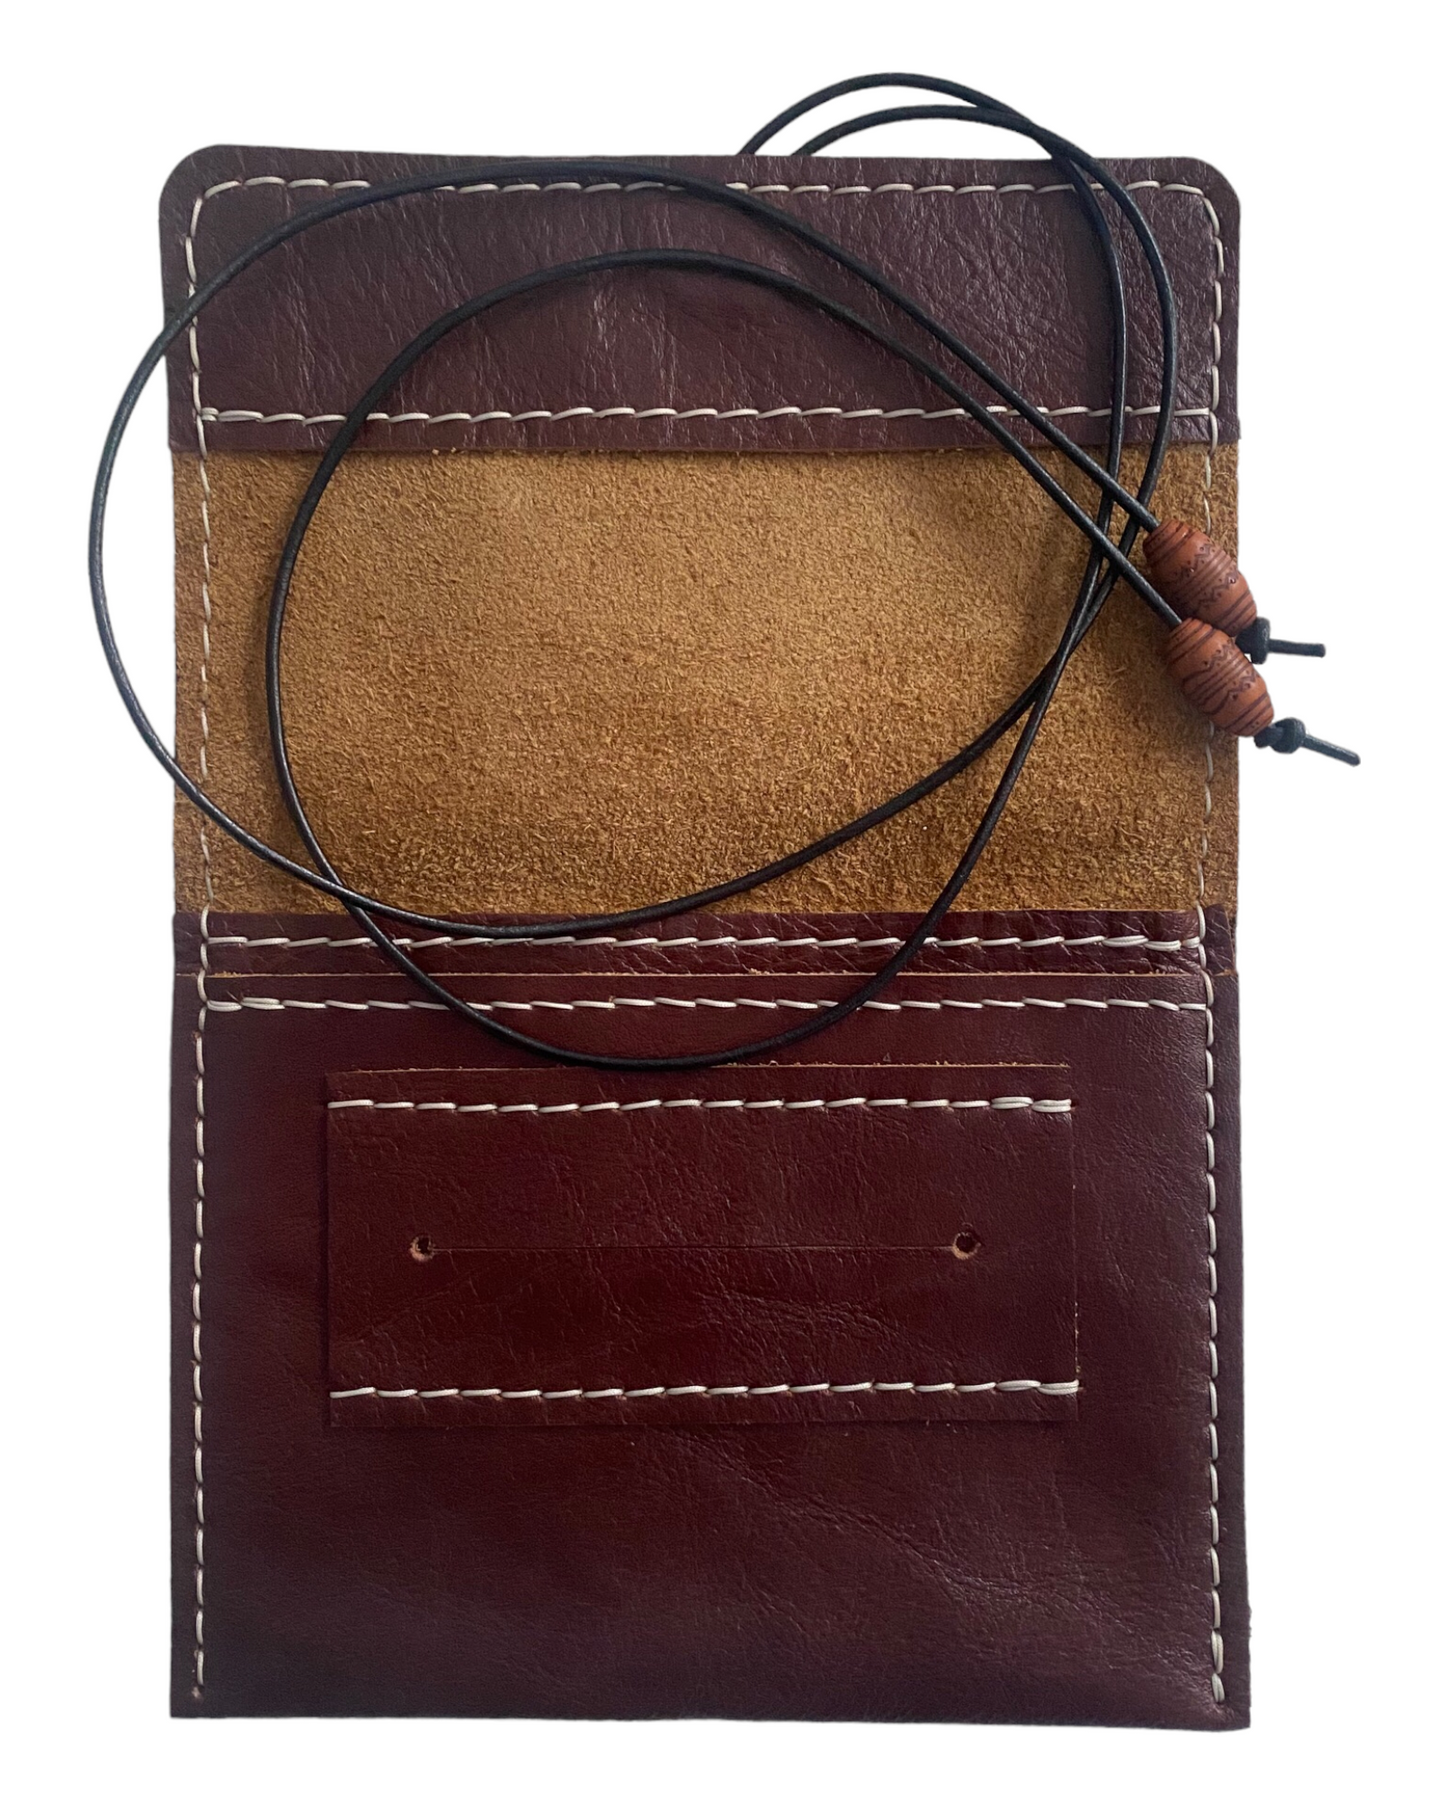 Handmade Leather Tobacco Pouch 50g